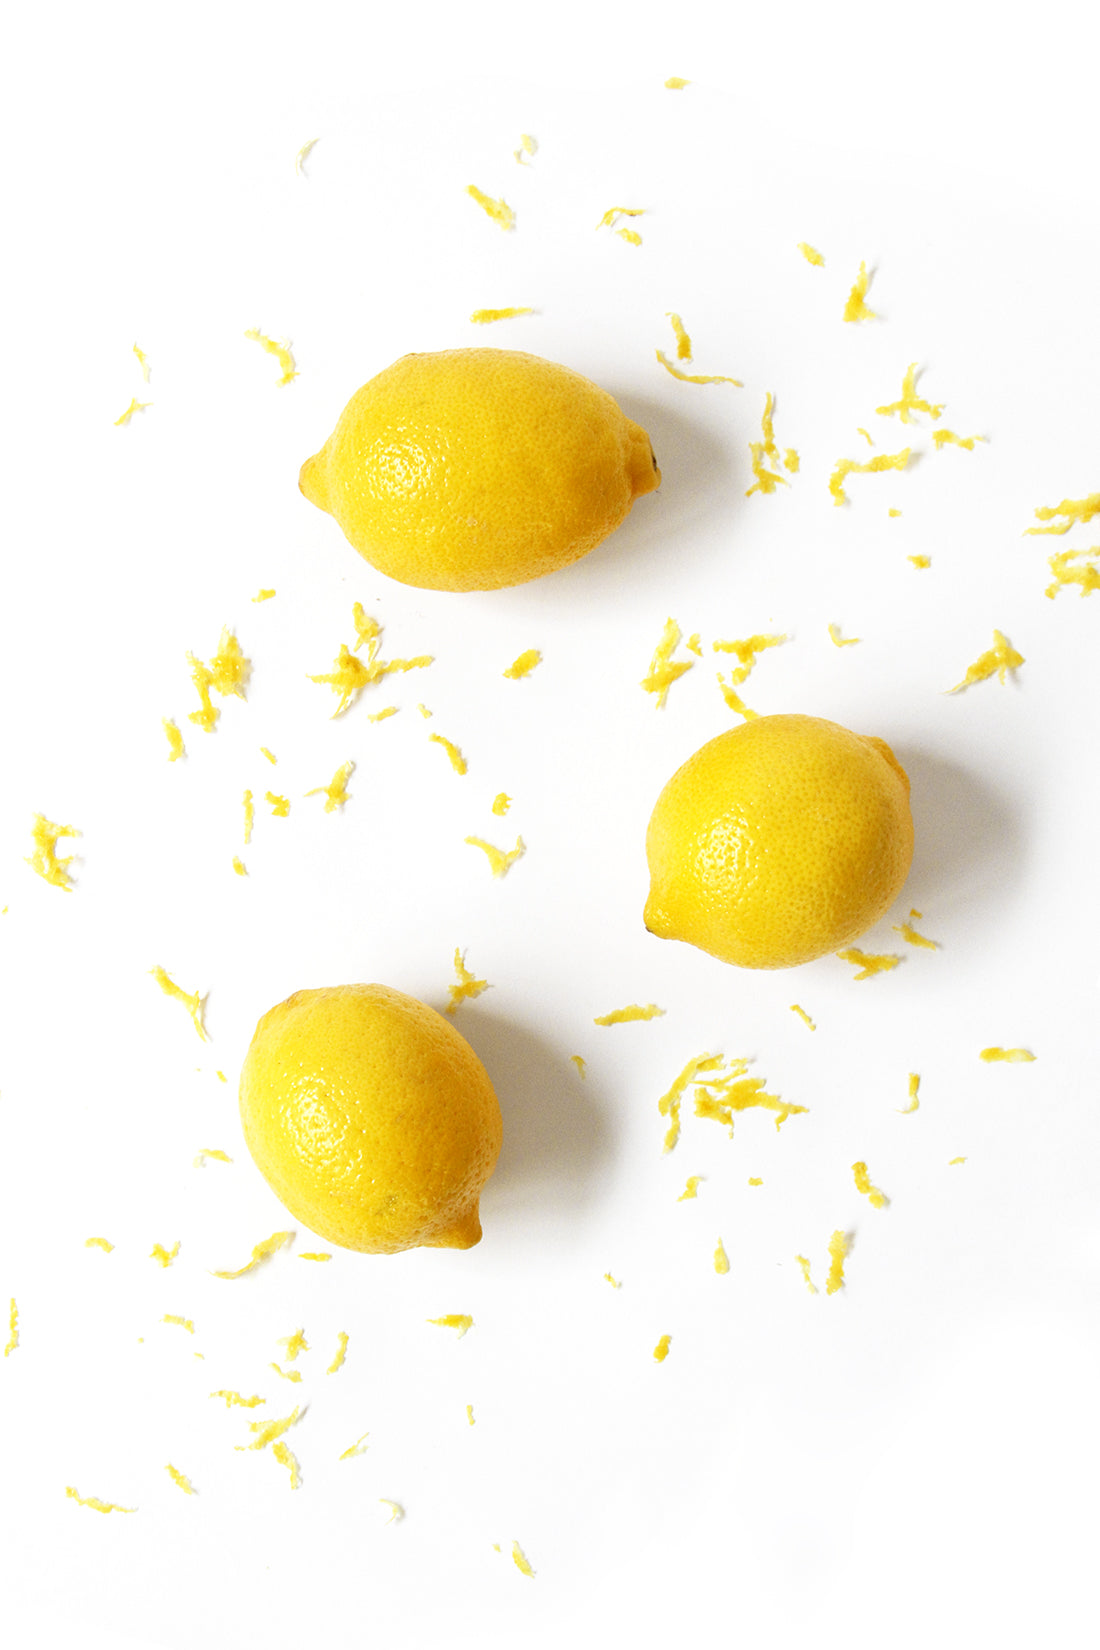 Image from above of three lemons around zest used for Miss Jones Baking Co Blackberry Buttermilk Donuts